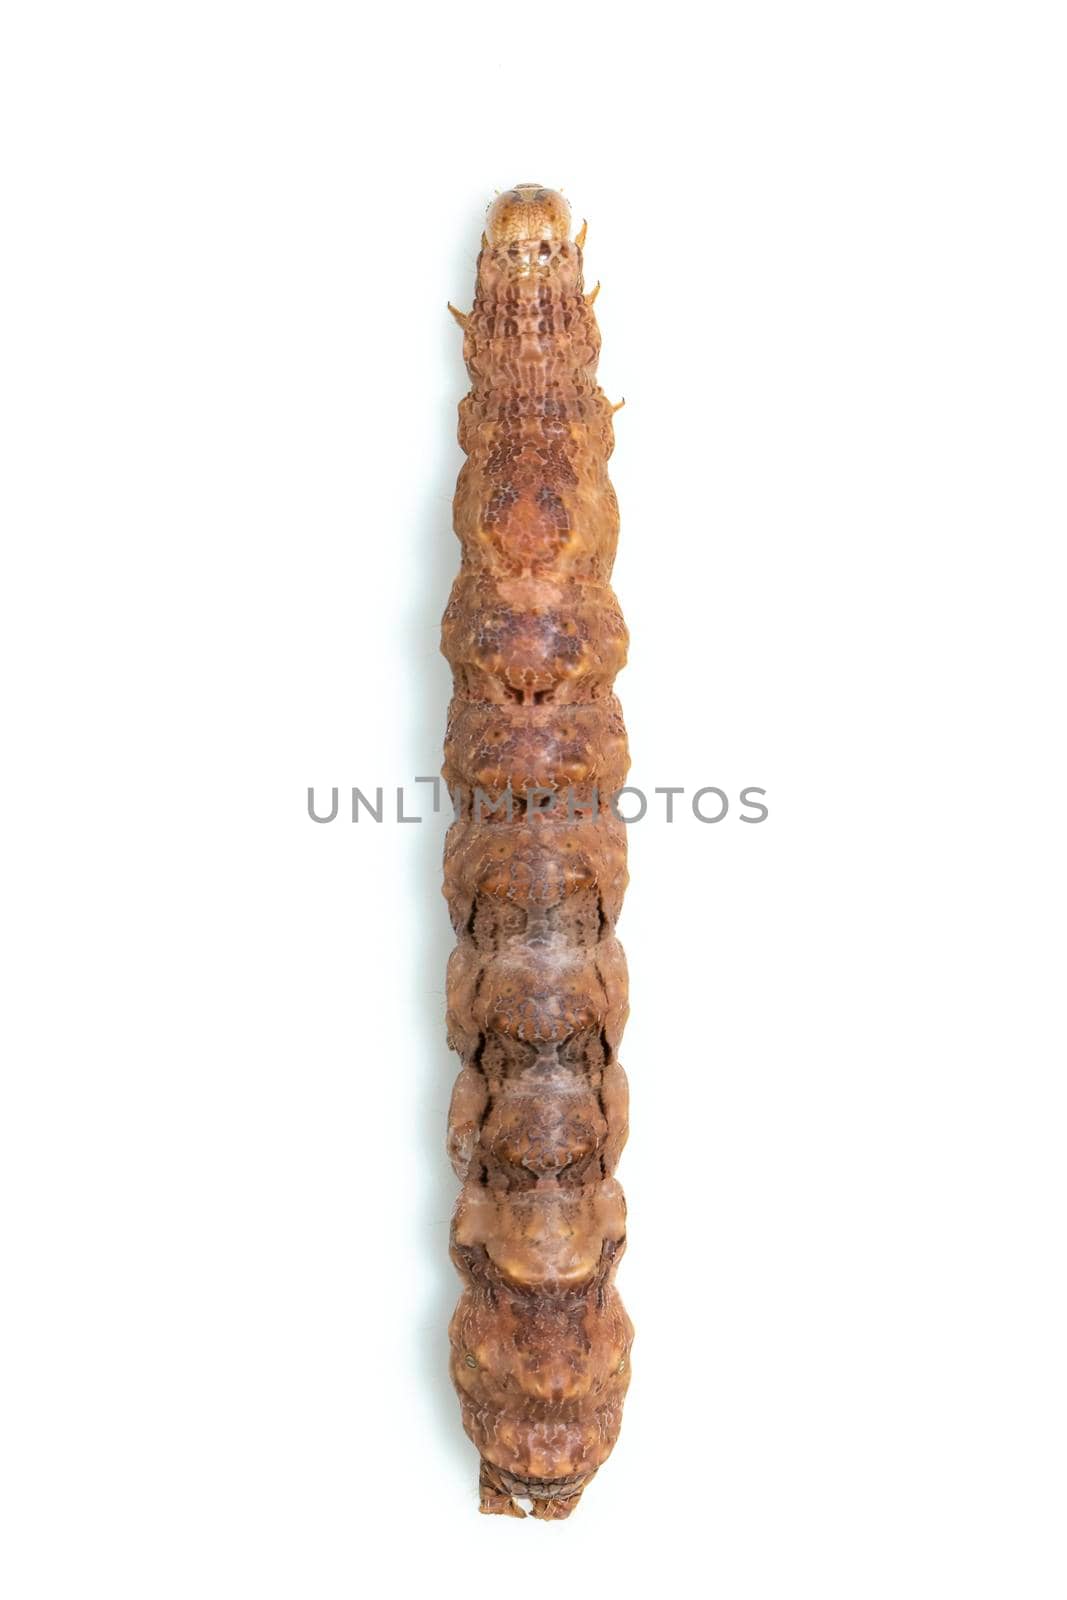 Image of brown caterpillars isolated on white background. Animal. Insect. Worm.